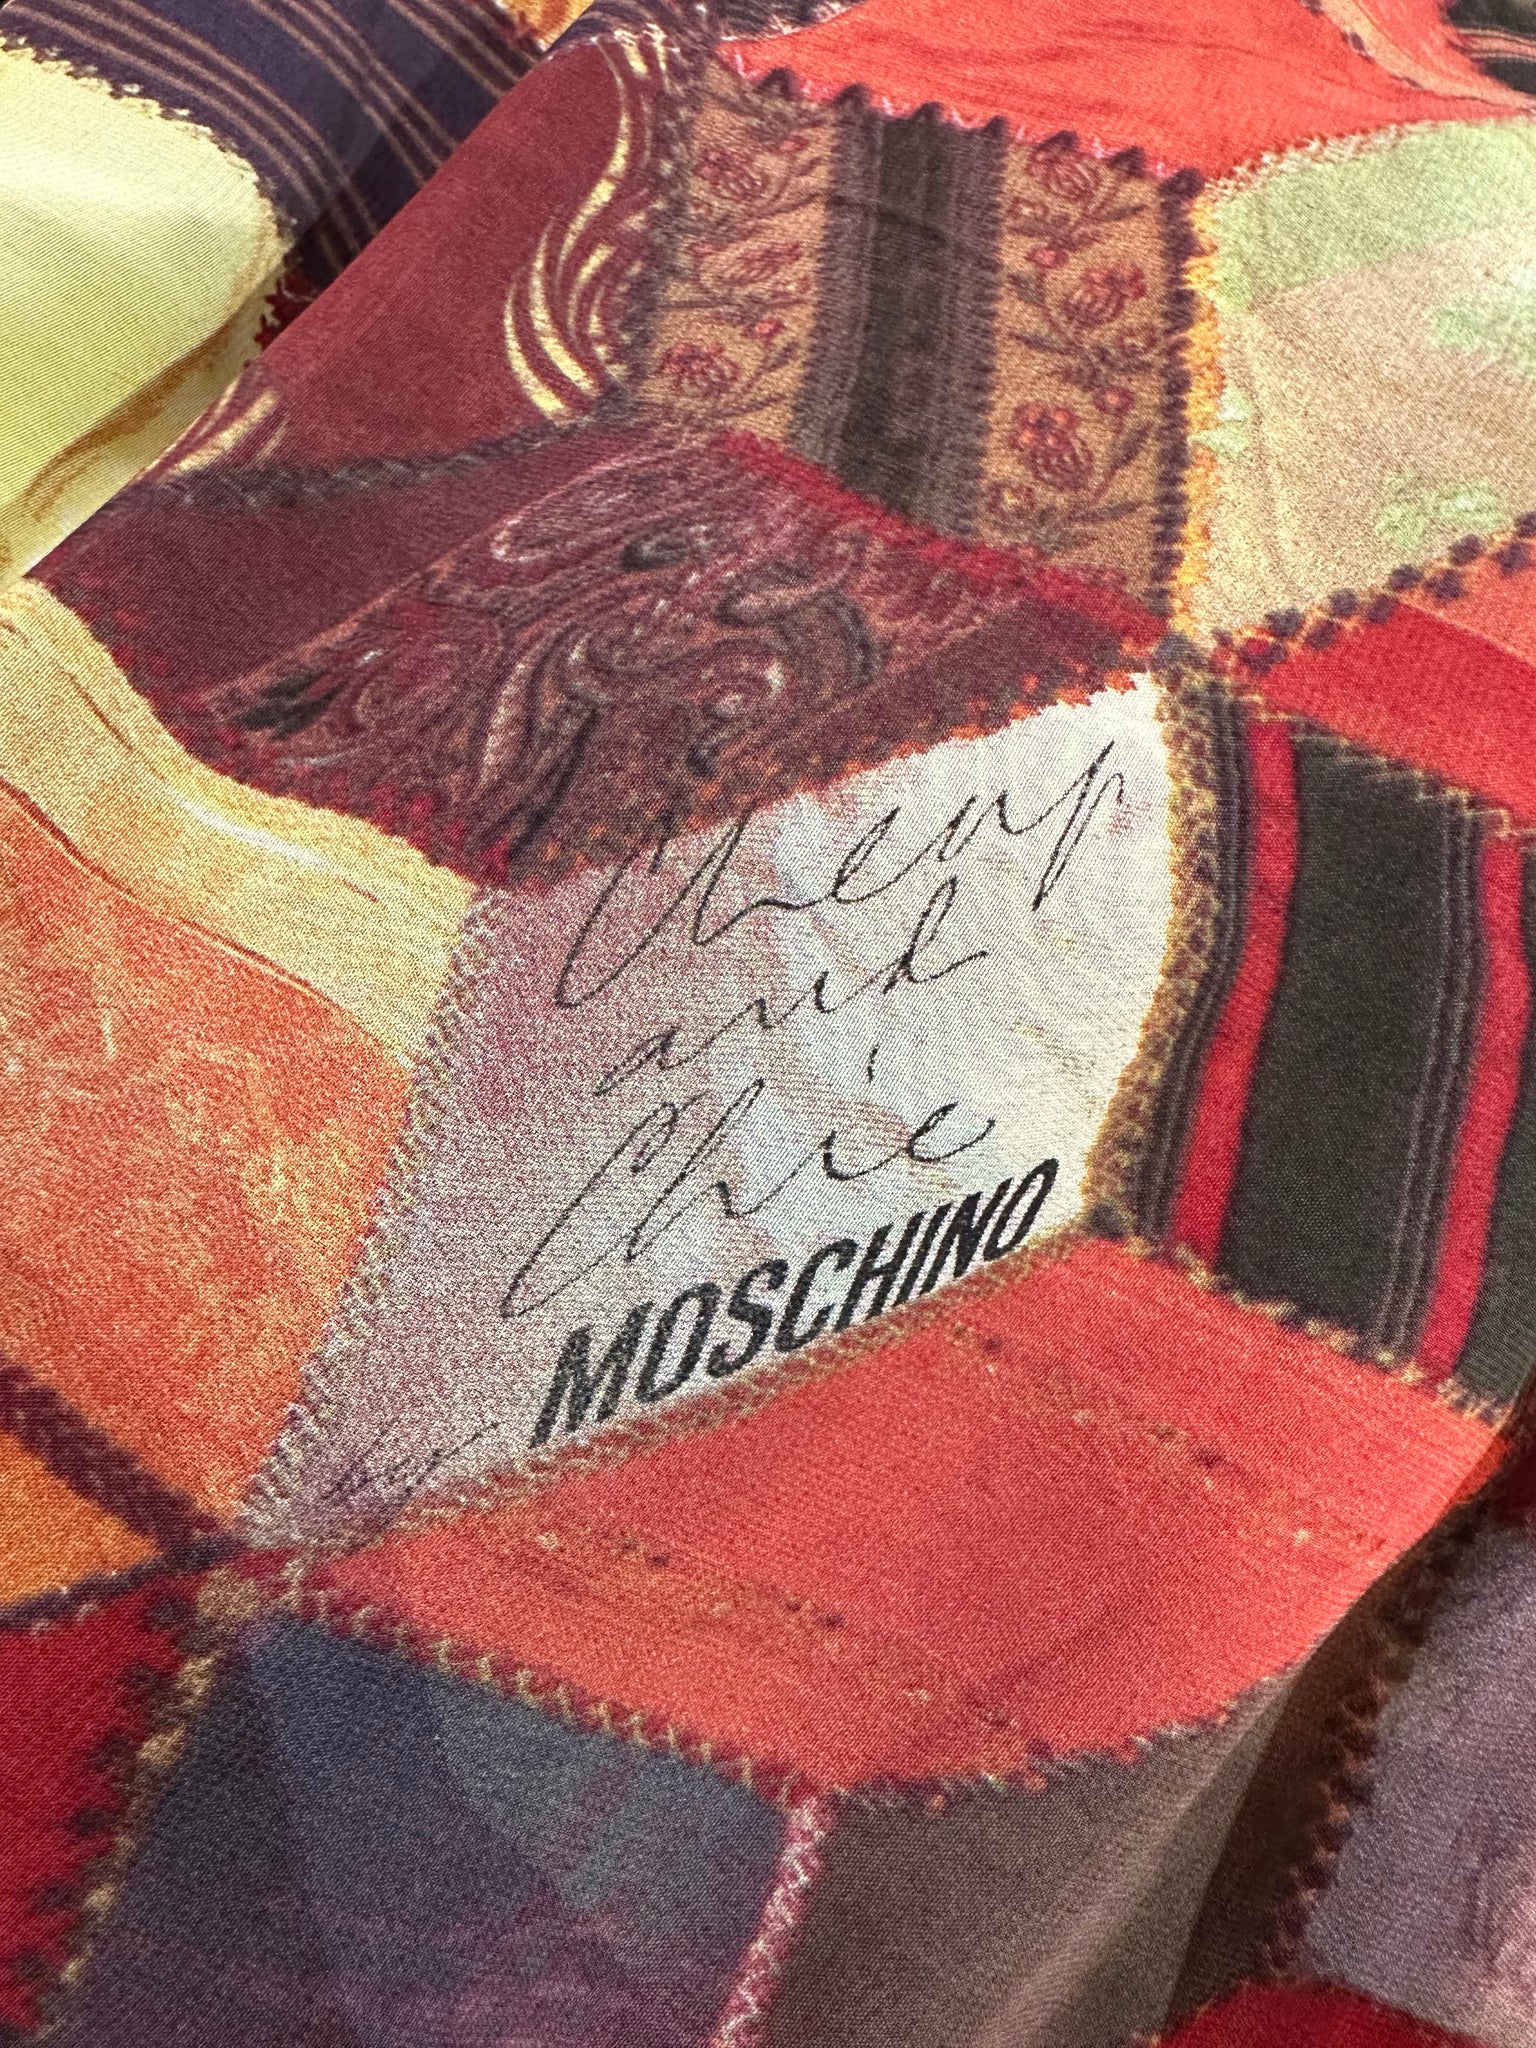  Moschino Cheap and Chic 1990s Mesh Trompe L'oeil Crazy Quilt Patchwork Fringed Shawl LABEL 5 of 5